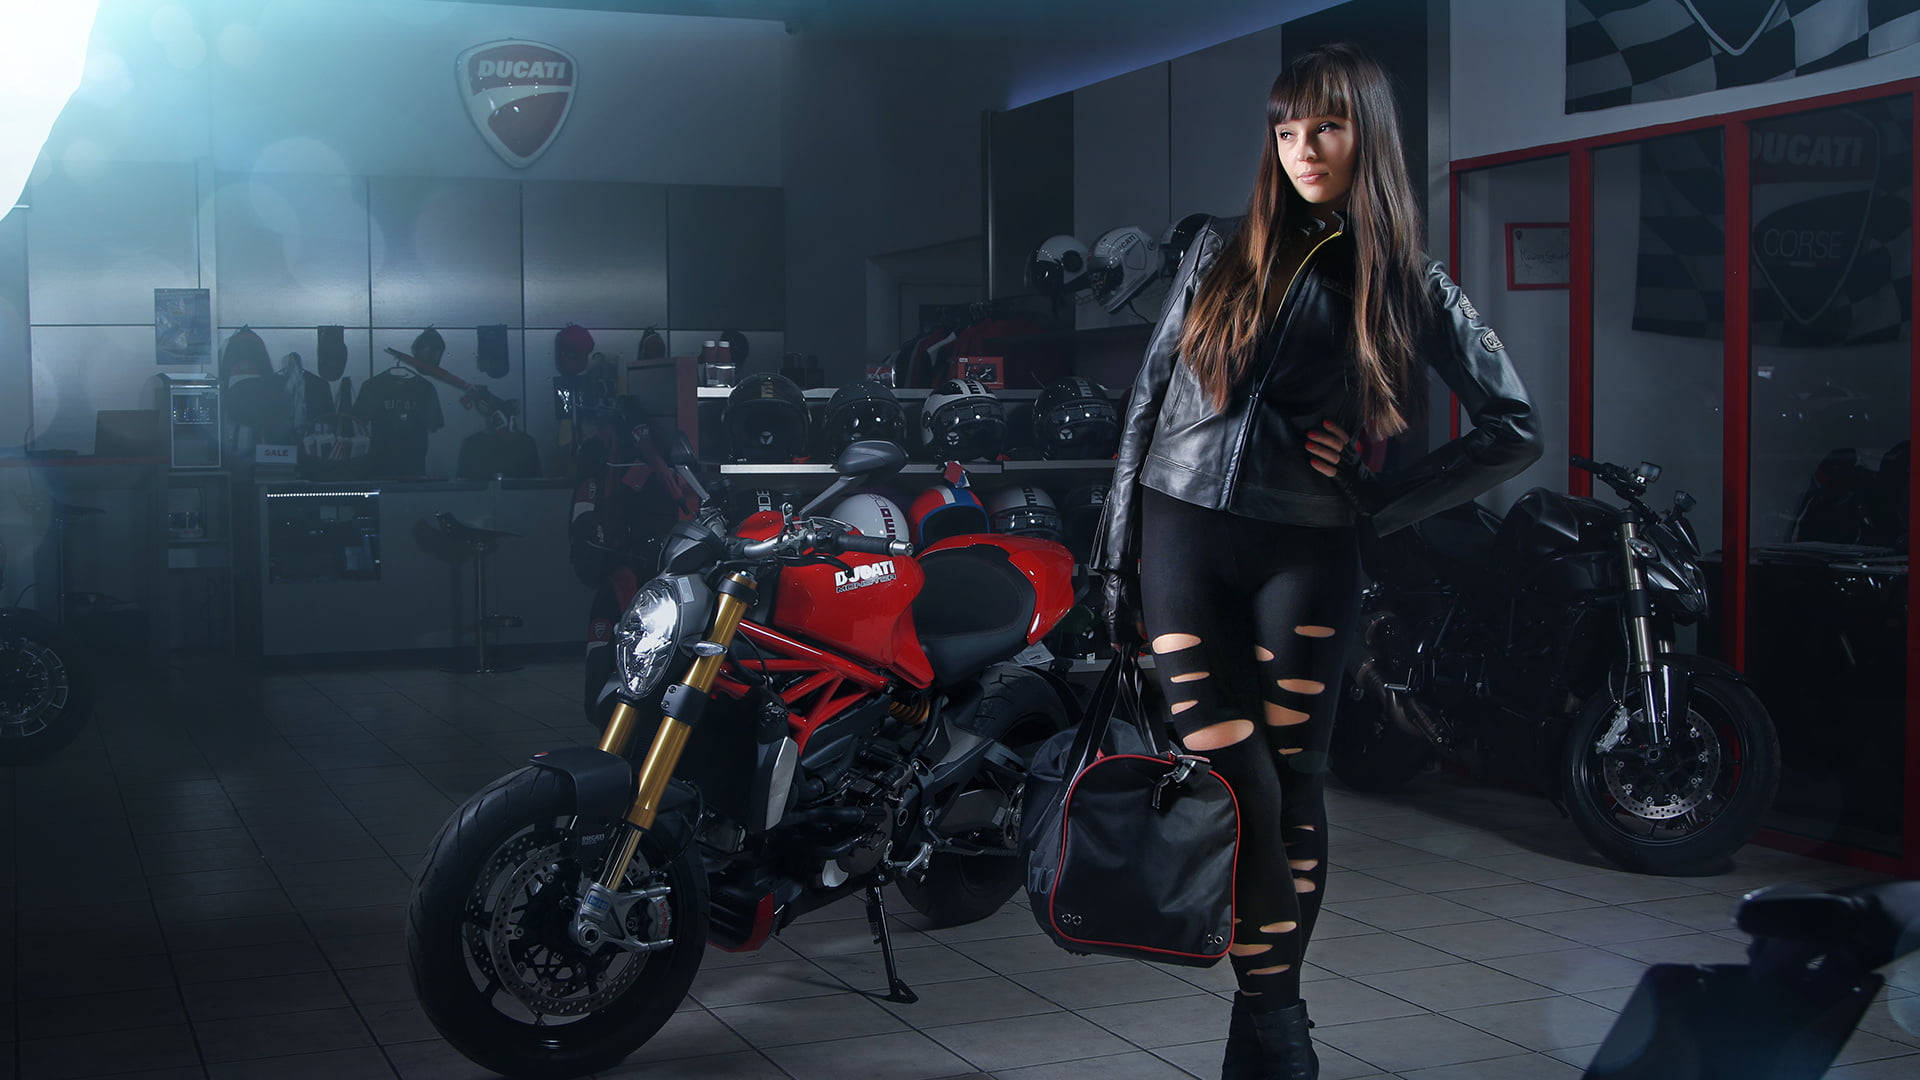 High-octane Style - Get All The Latest Gear At A Ducati Store